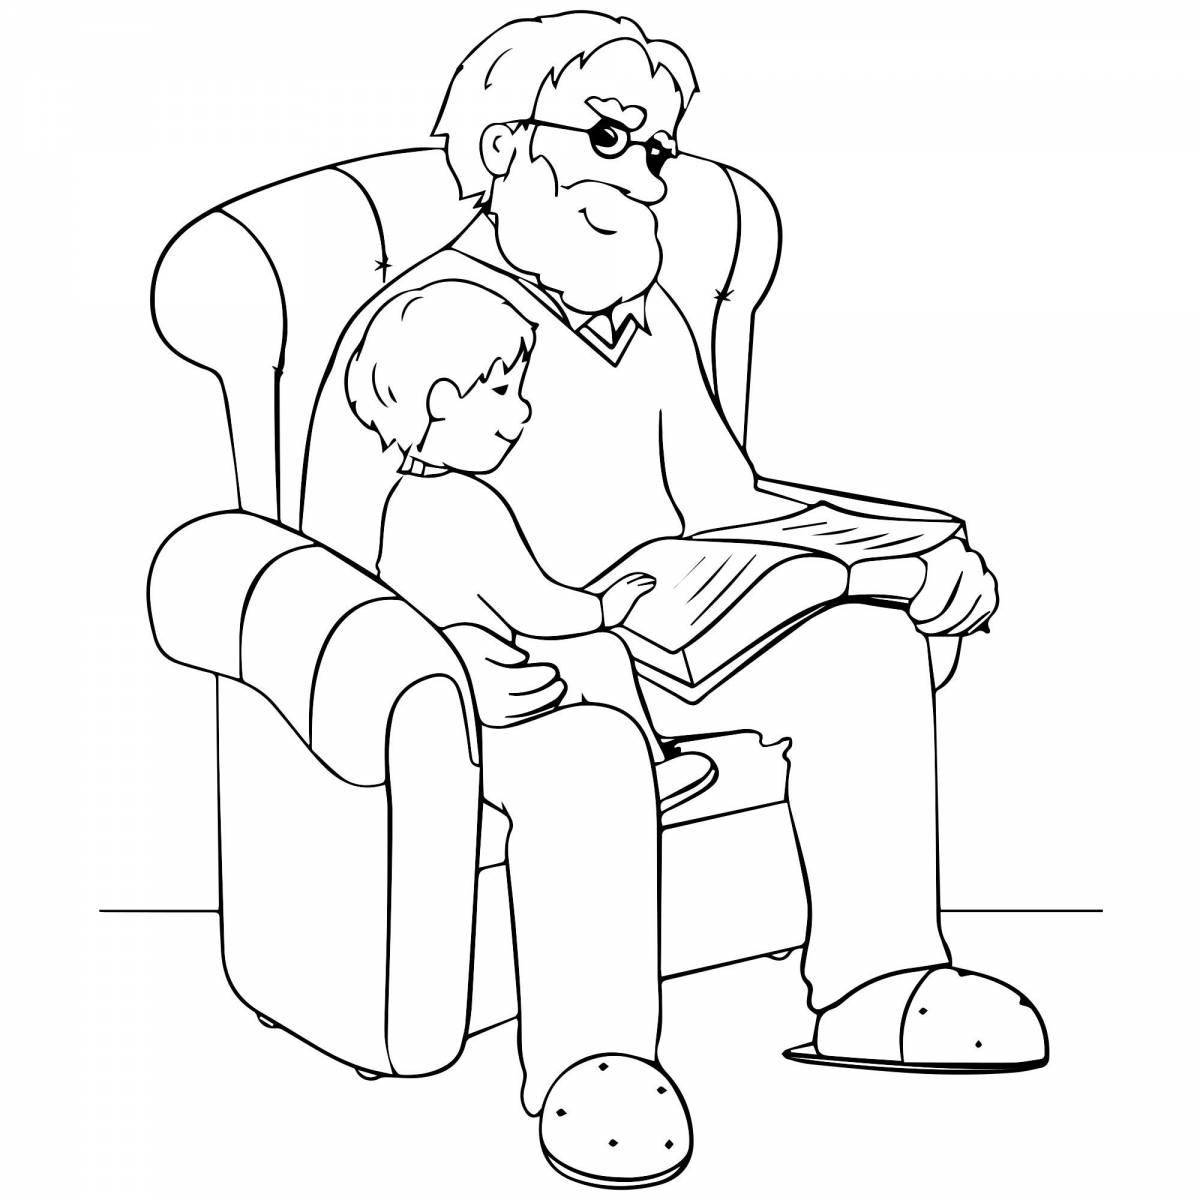 Playful grandparents coloring page